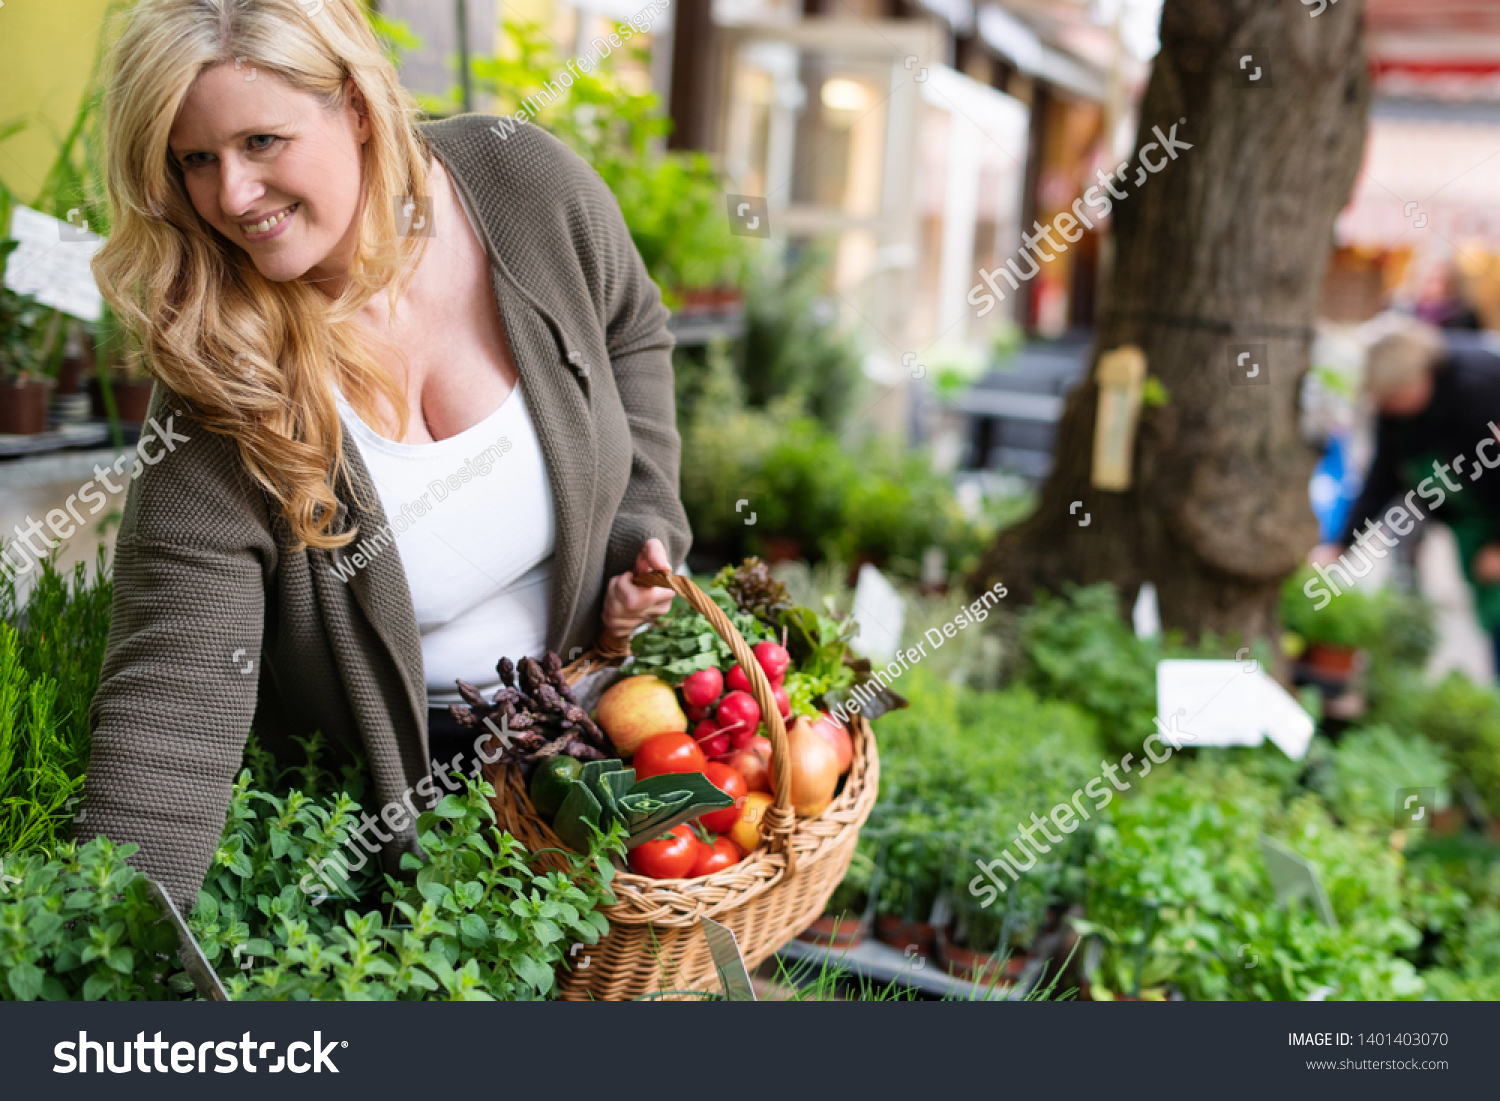 A housewife buys fresh herbs at a market #1401403070